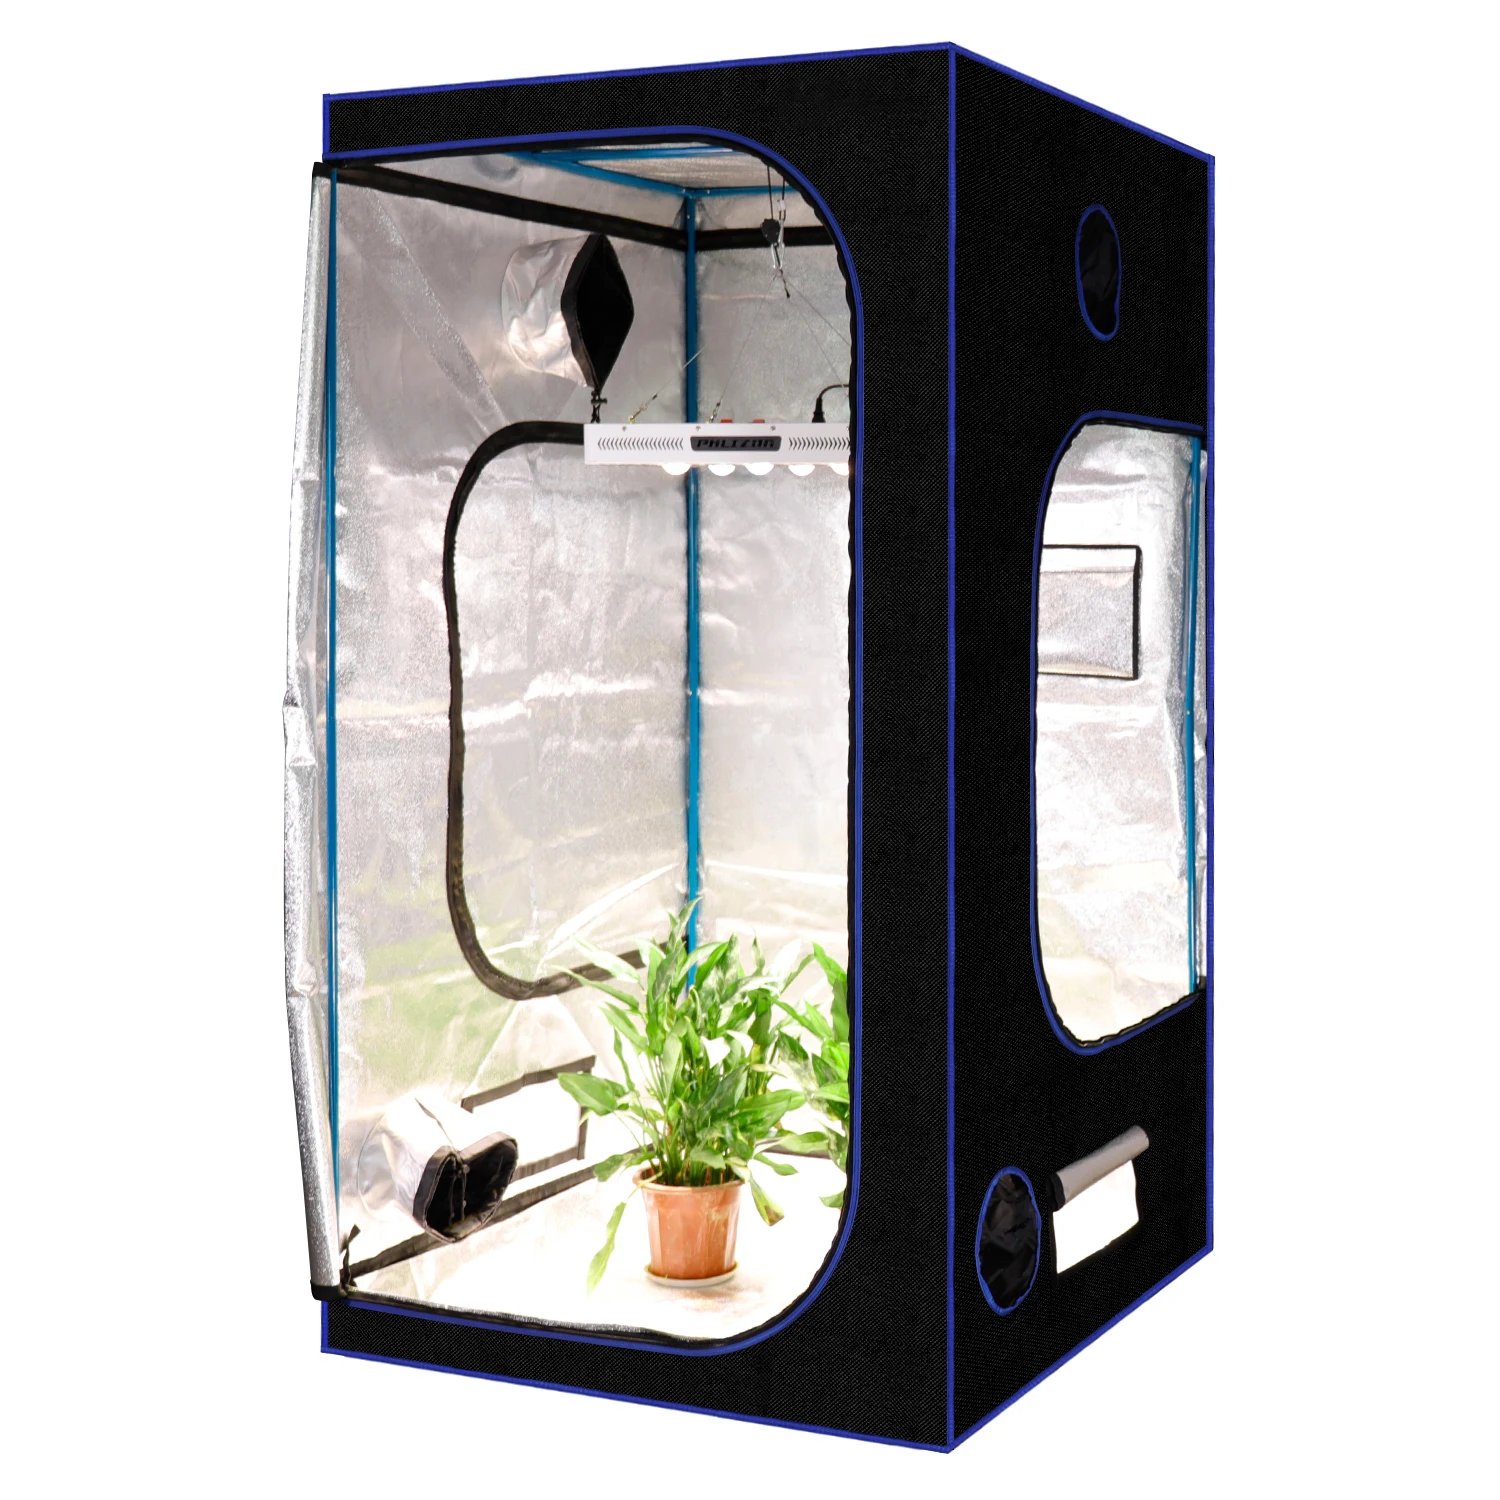 

Phlizon LED Grow Tent Rooms Indoor Plant Black Green Waterproof Light 4*4 ft Hydroponic 600D for Grow Plants Sunflower